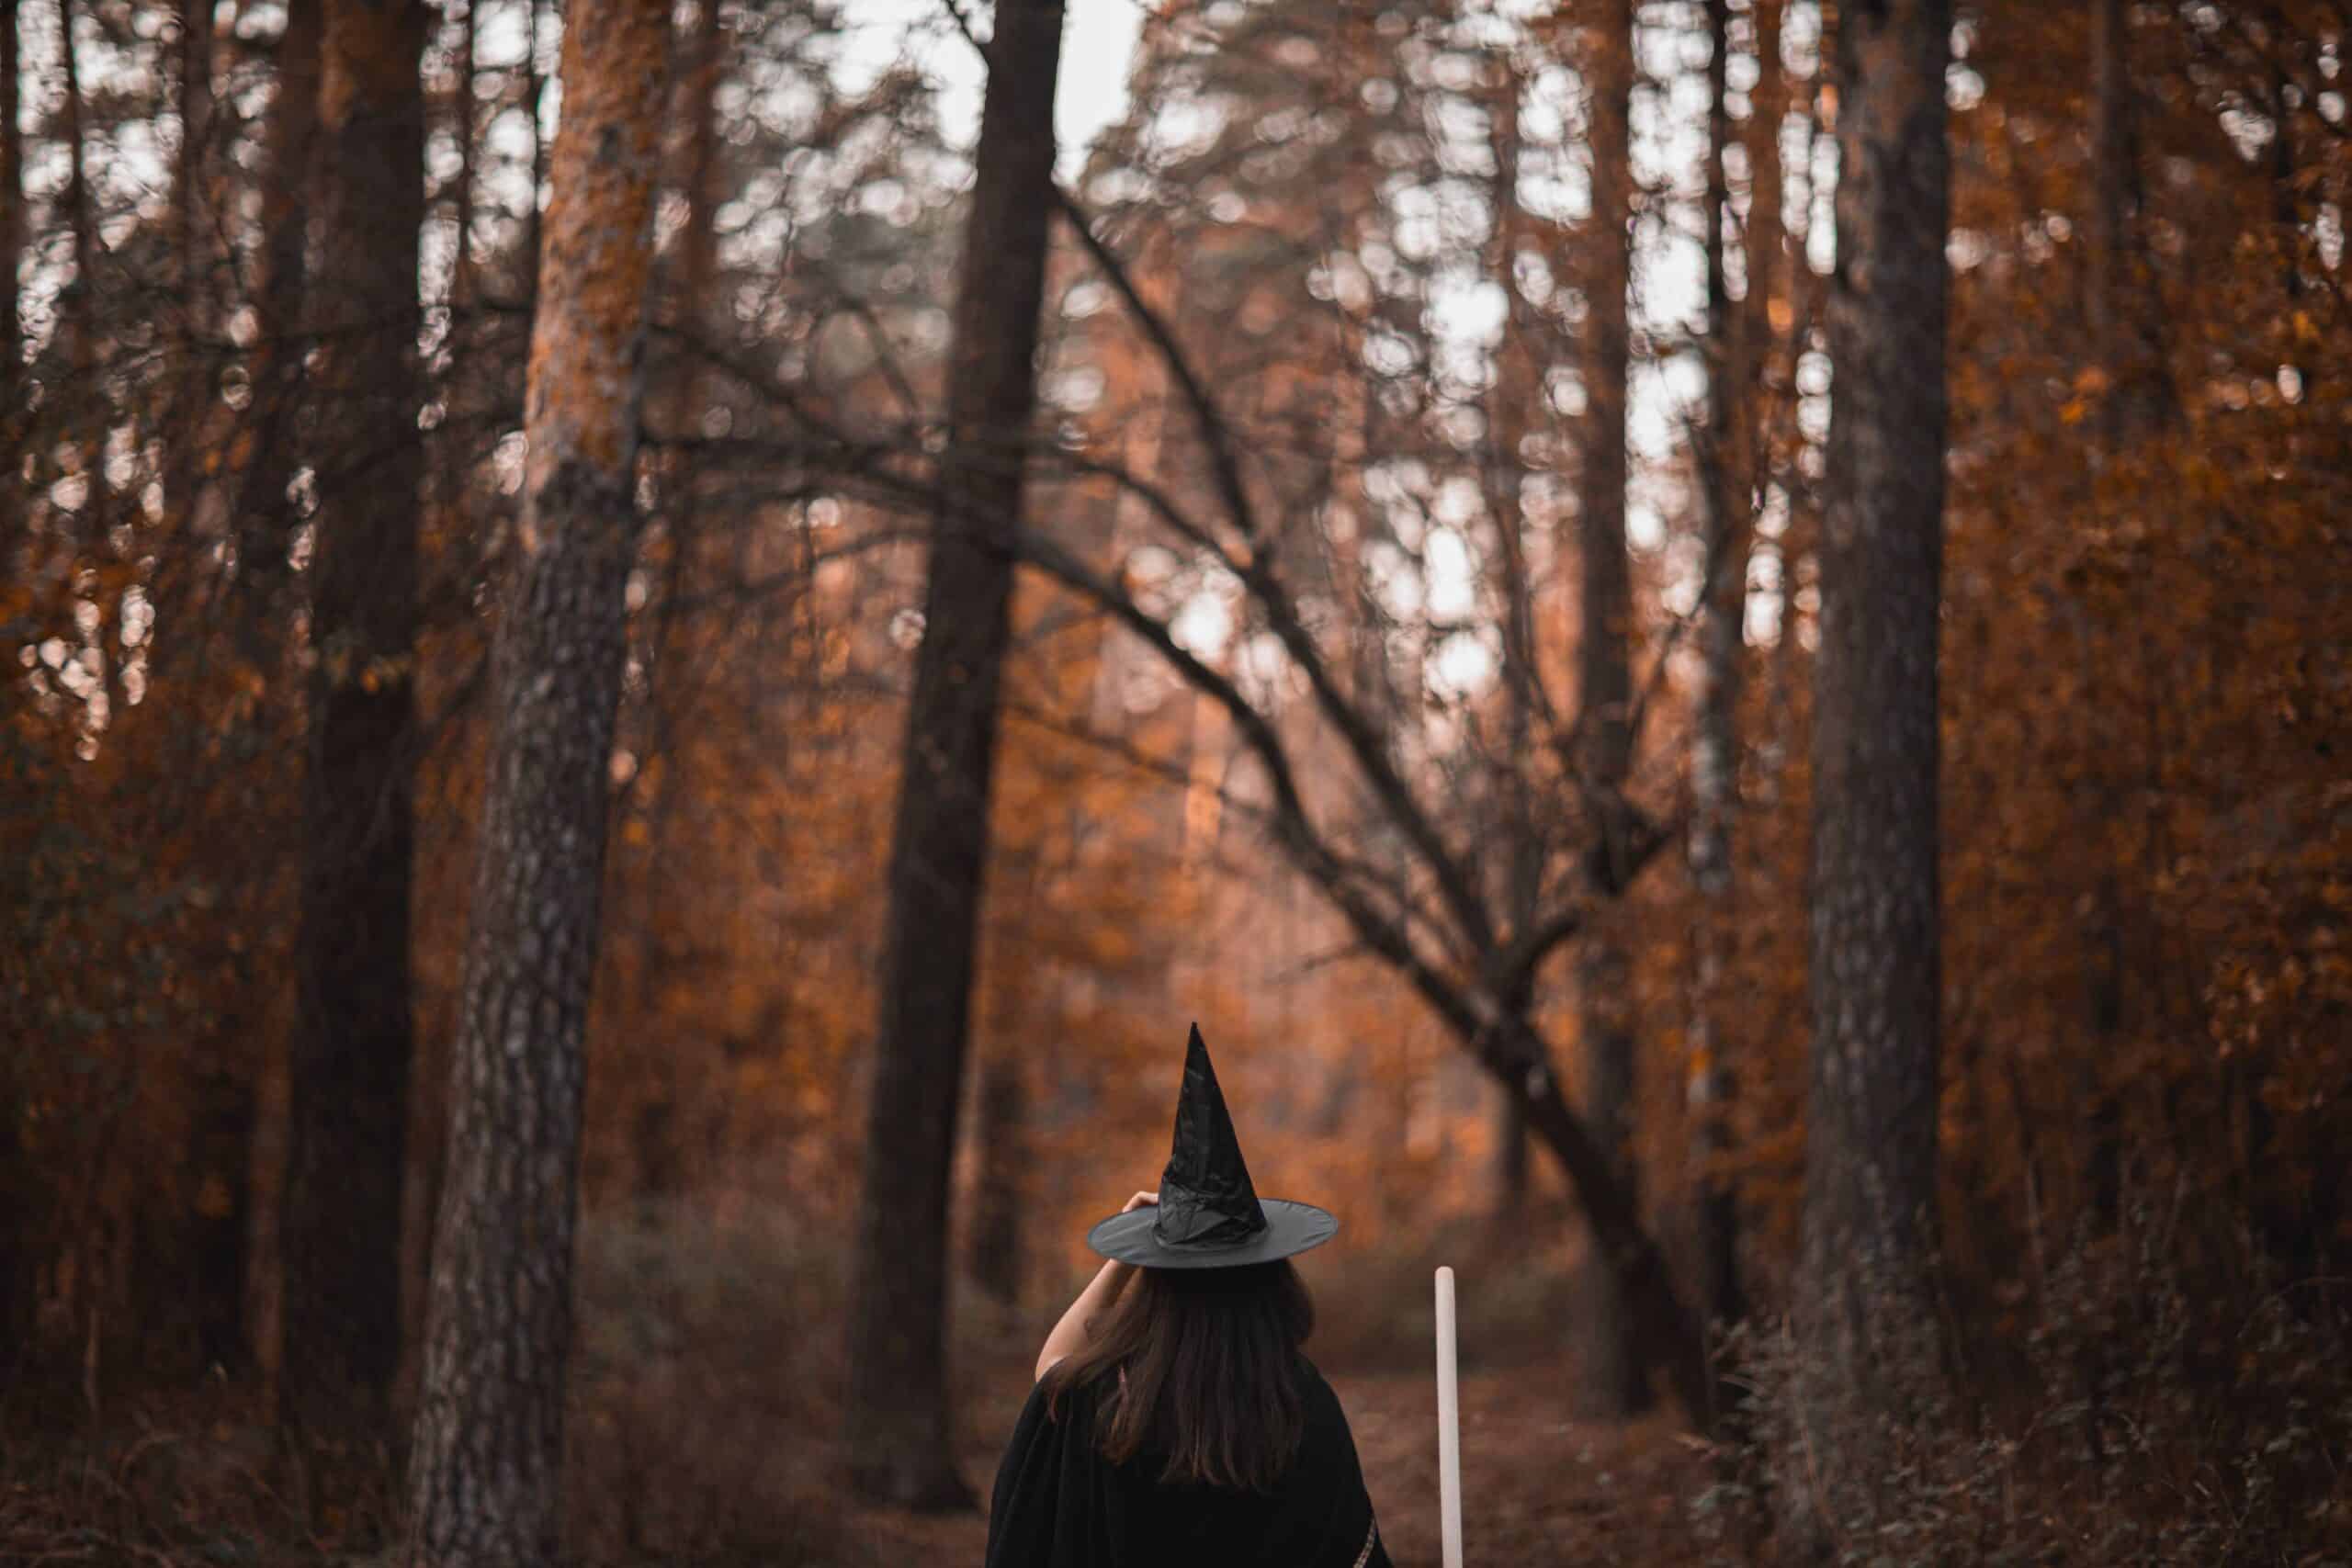 A person with long hair wearing a pointed witch hat walks into a forest